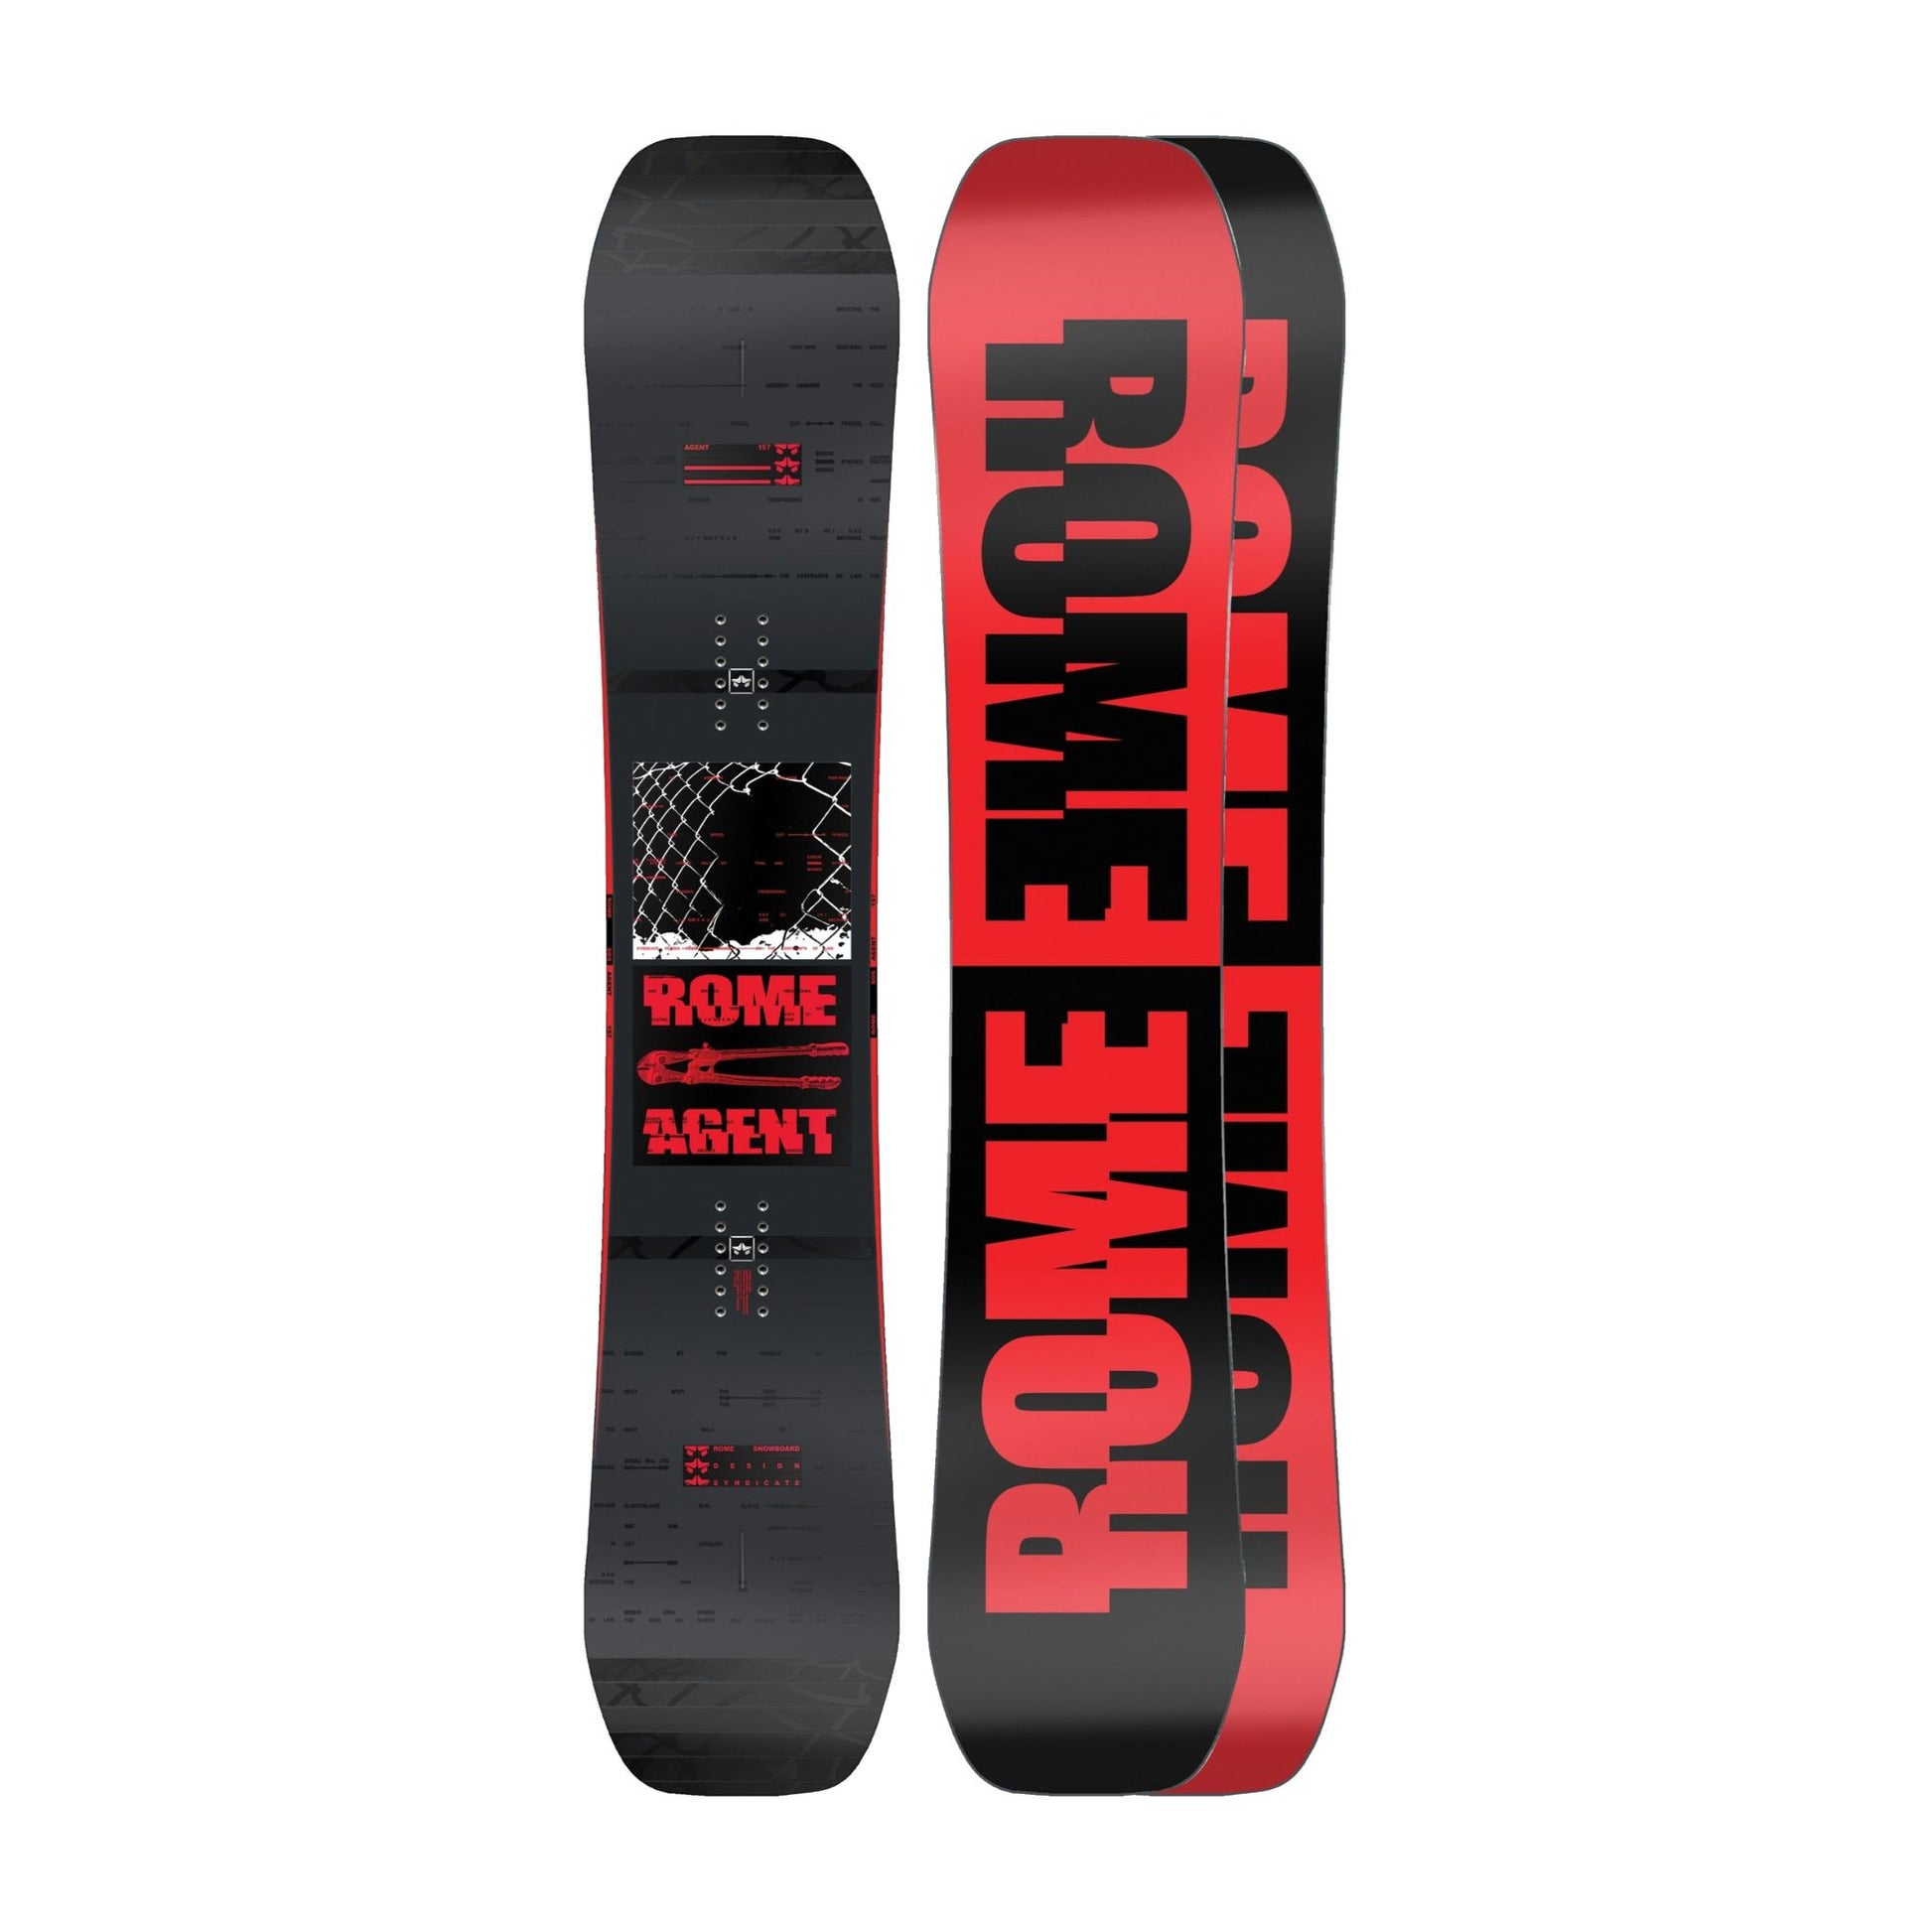 Rome Agent Snowboards 160 Snowboards